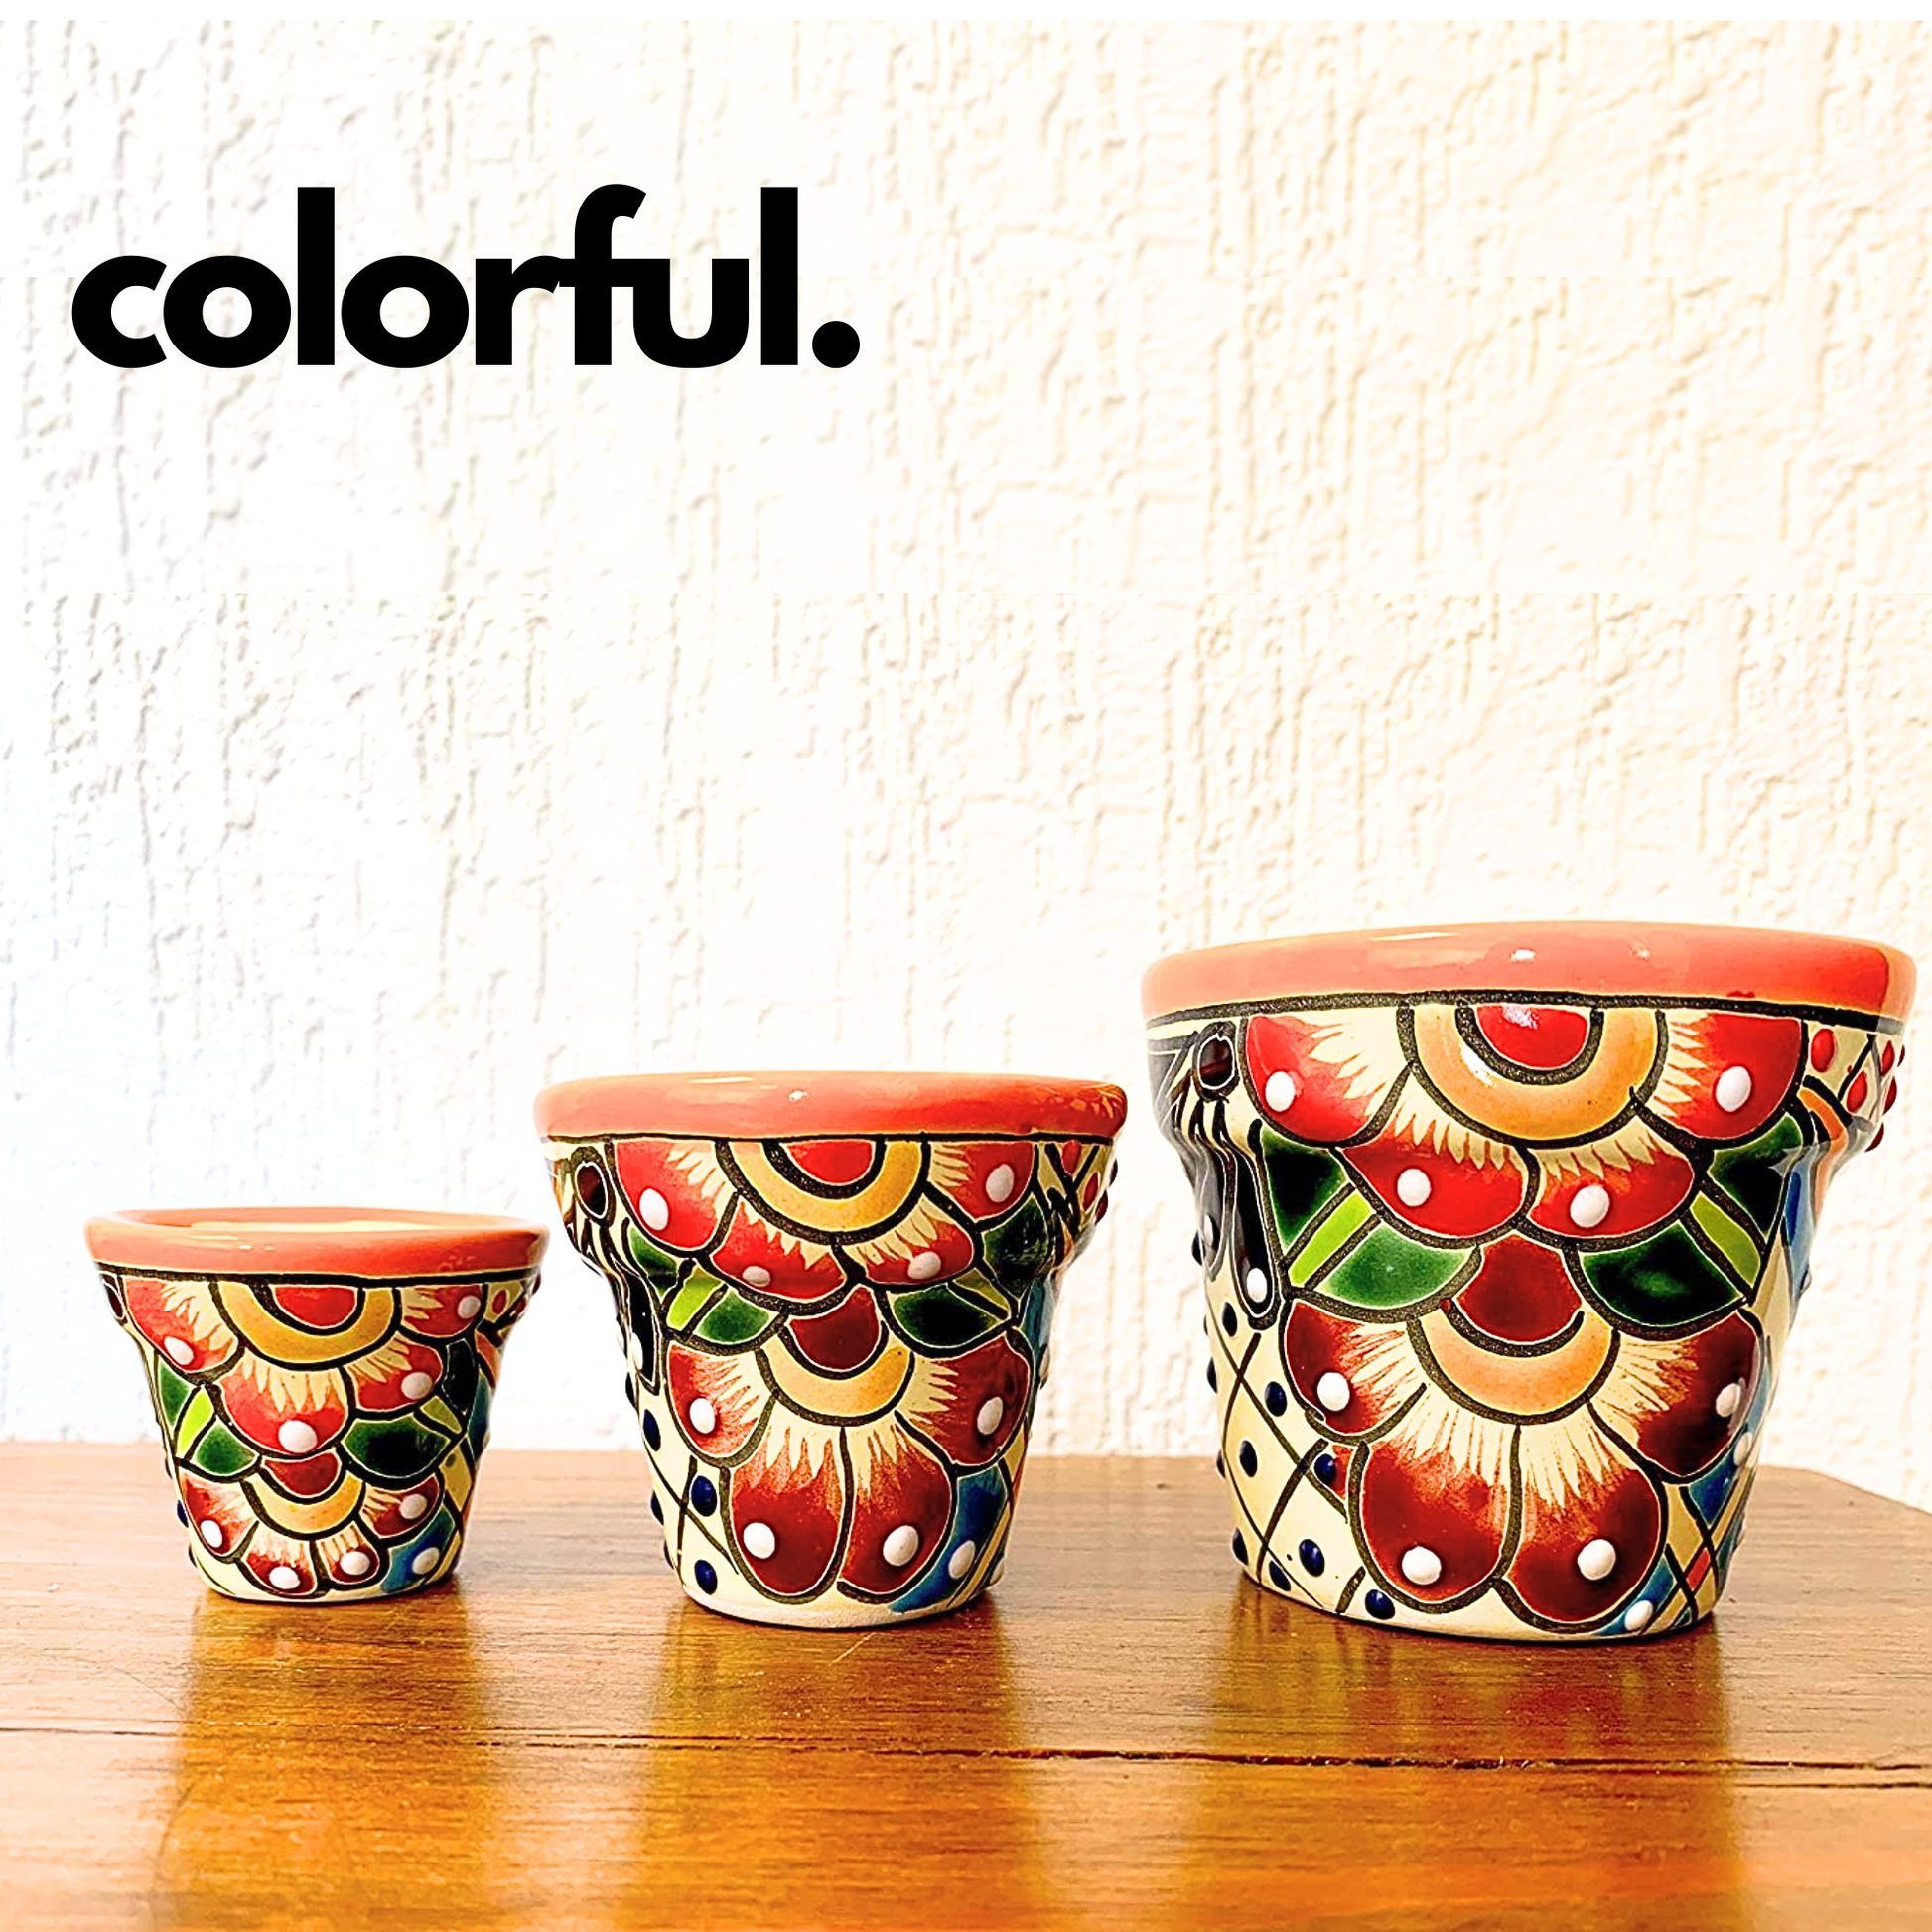 colorful Talavera Ceramic Mini Plant Pots, hand-painted with vibrant designs by Mexican artisans, perfect for small plants and interior decor.